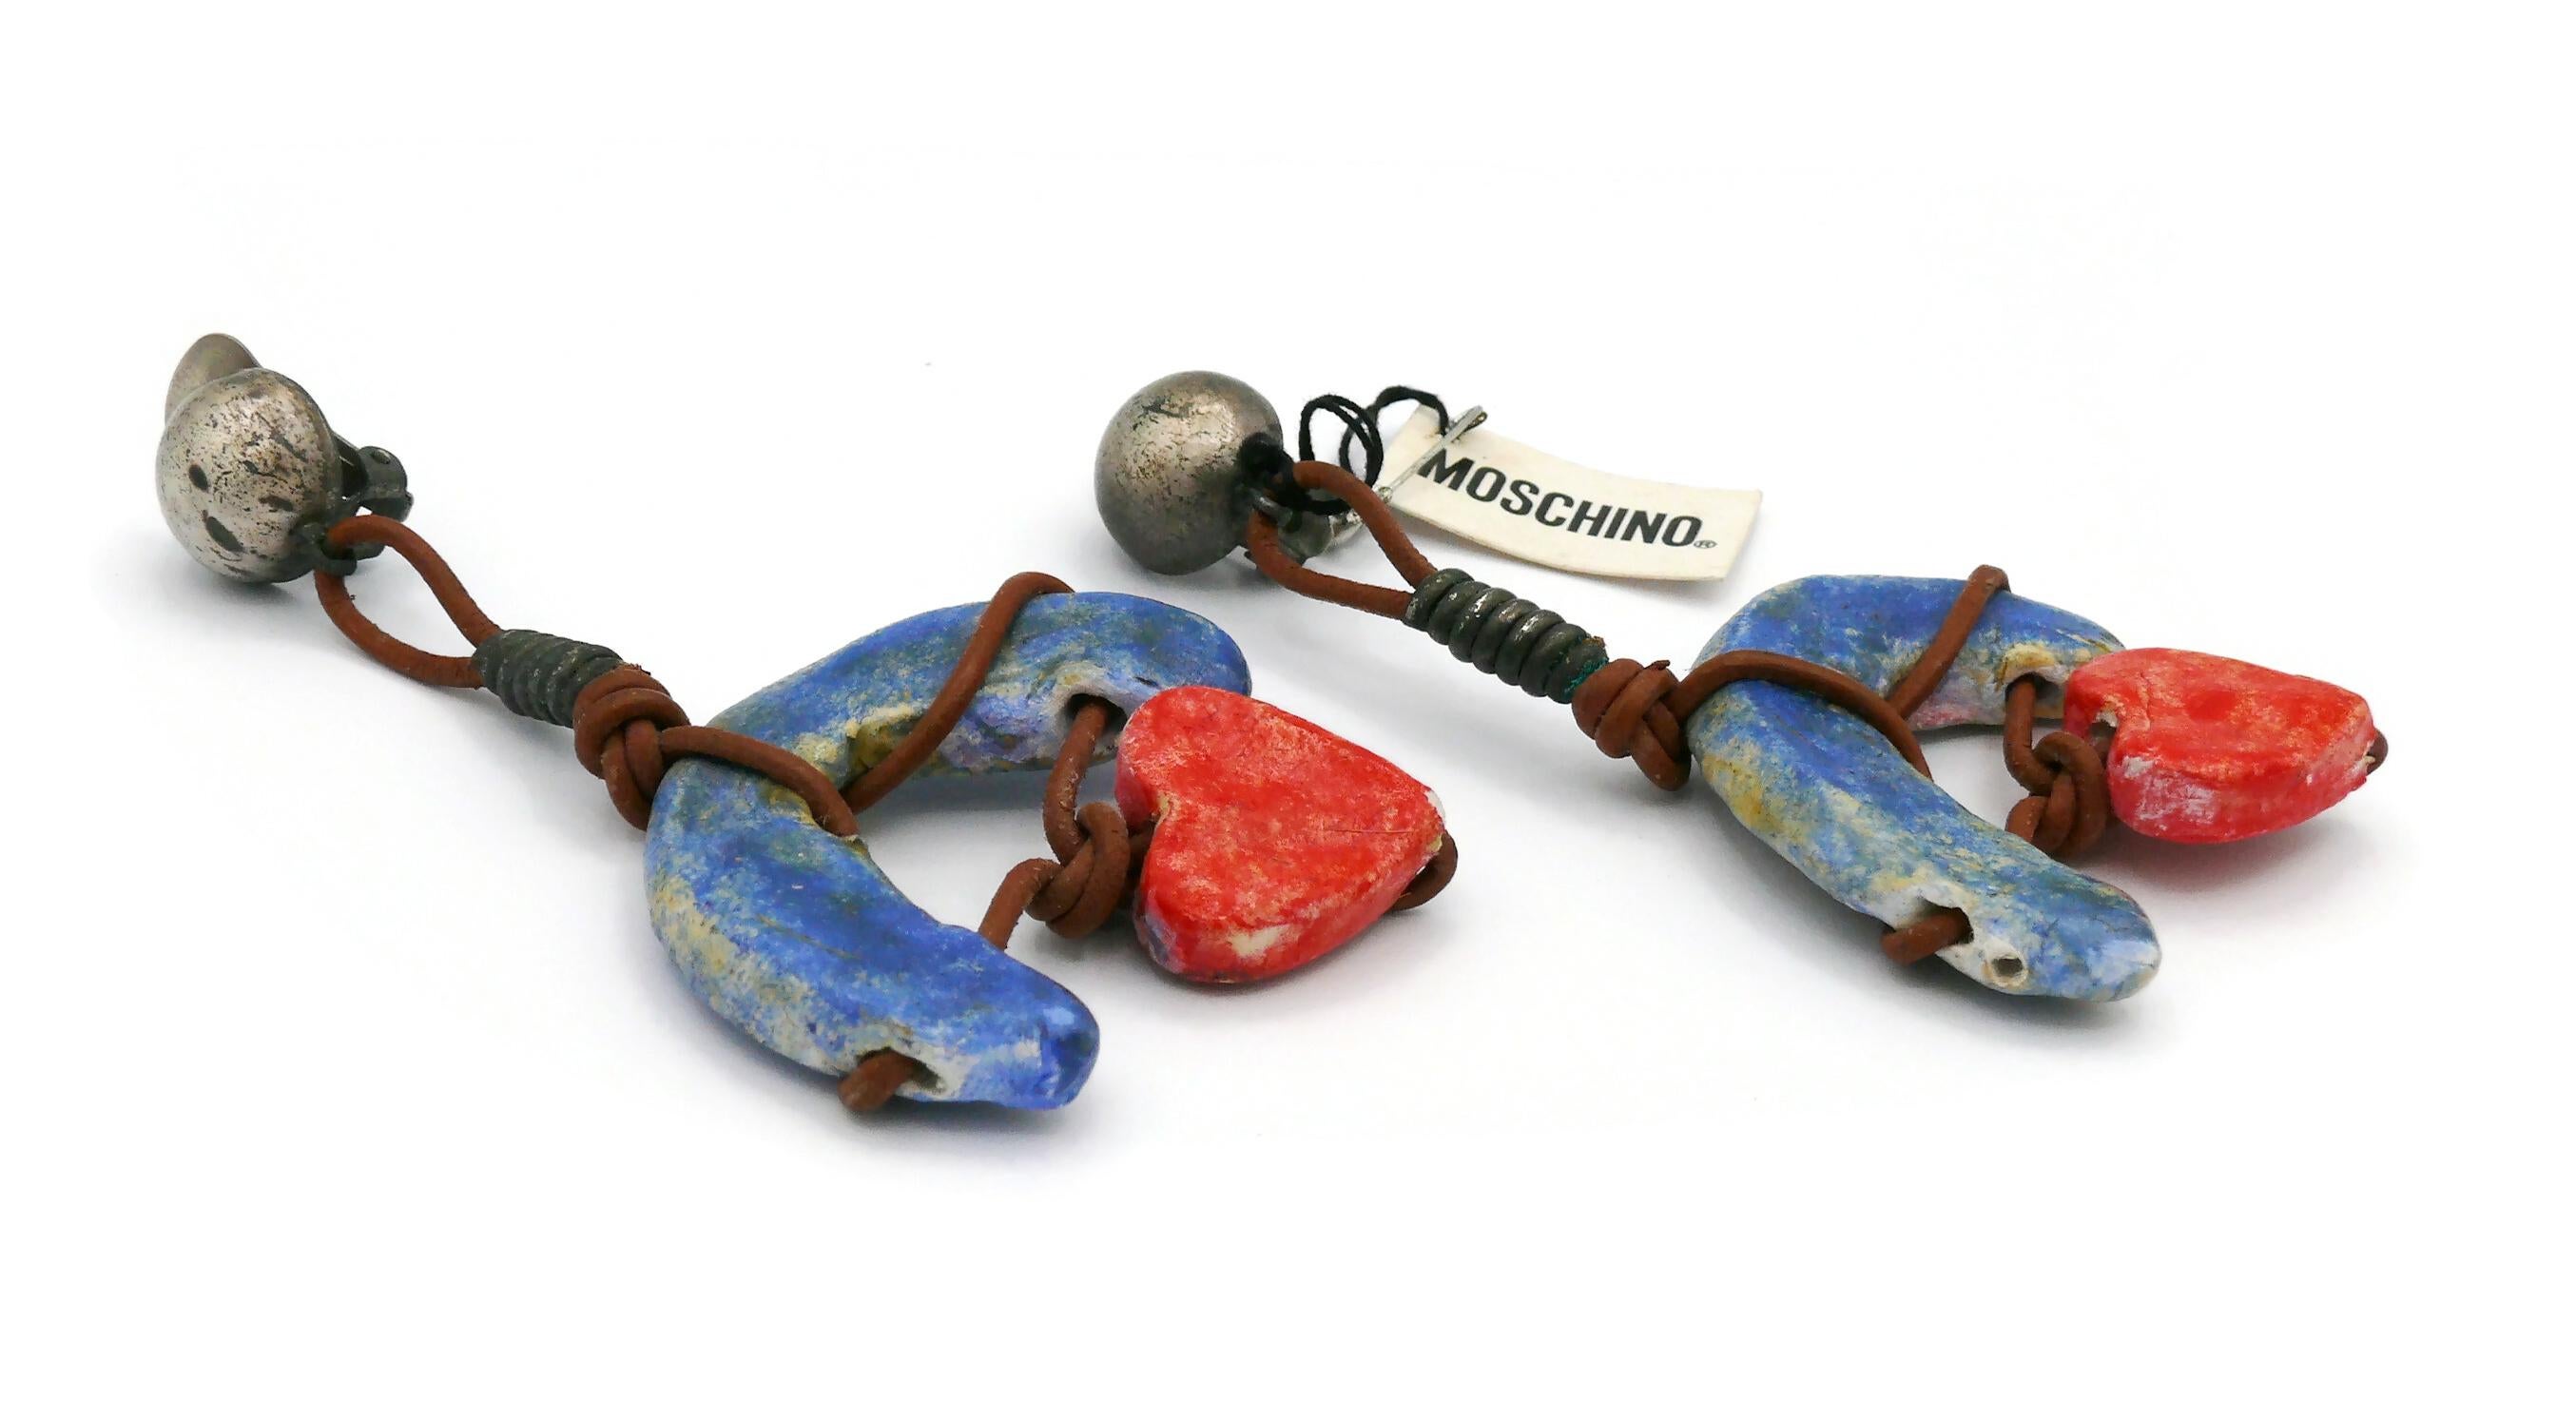 MOSCHINO Vintage Papier-Mâché Heart Dangling Earrings In Fair Condition For Sale In Nice, FR